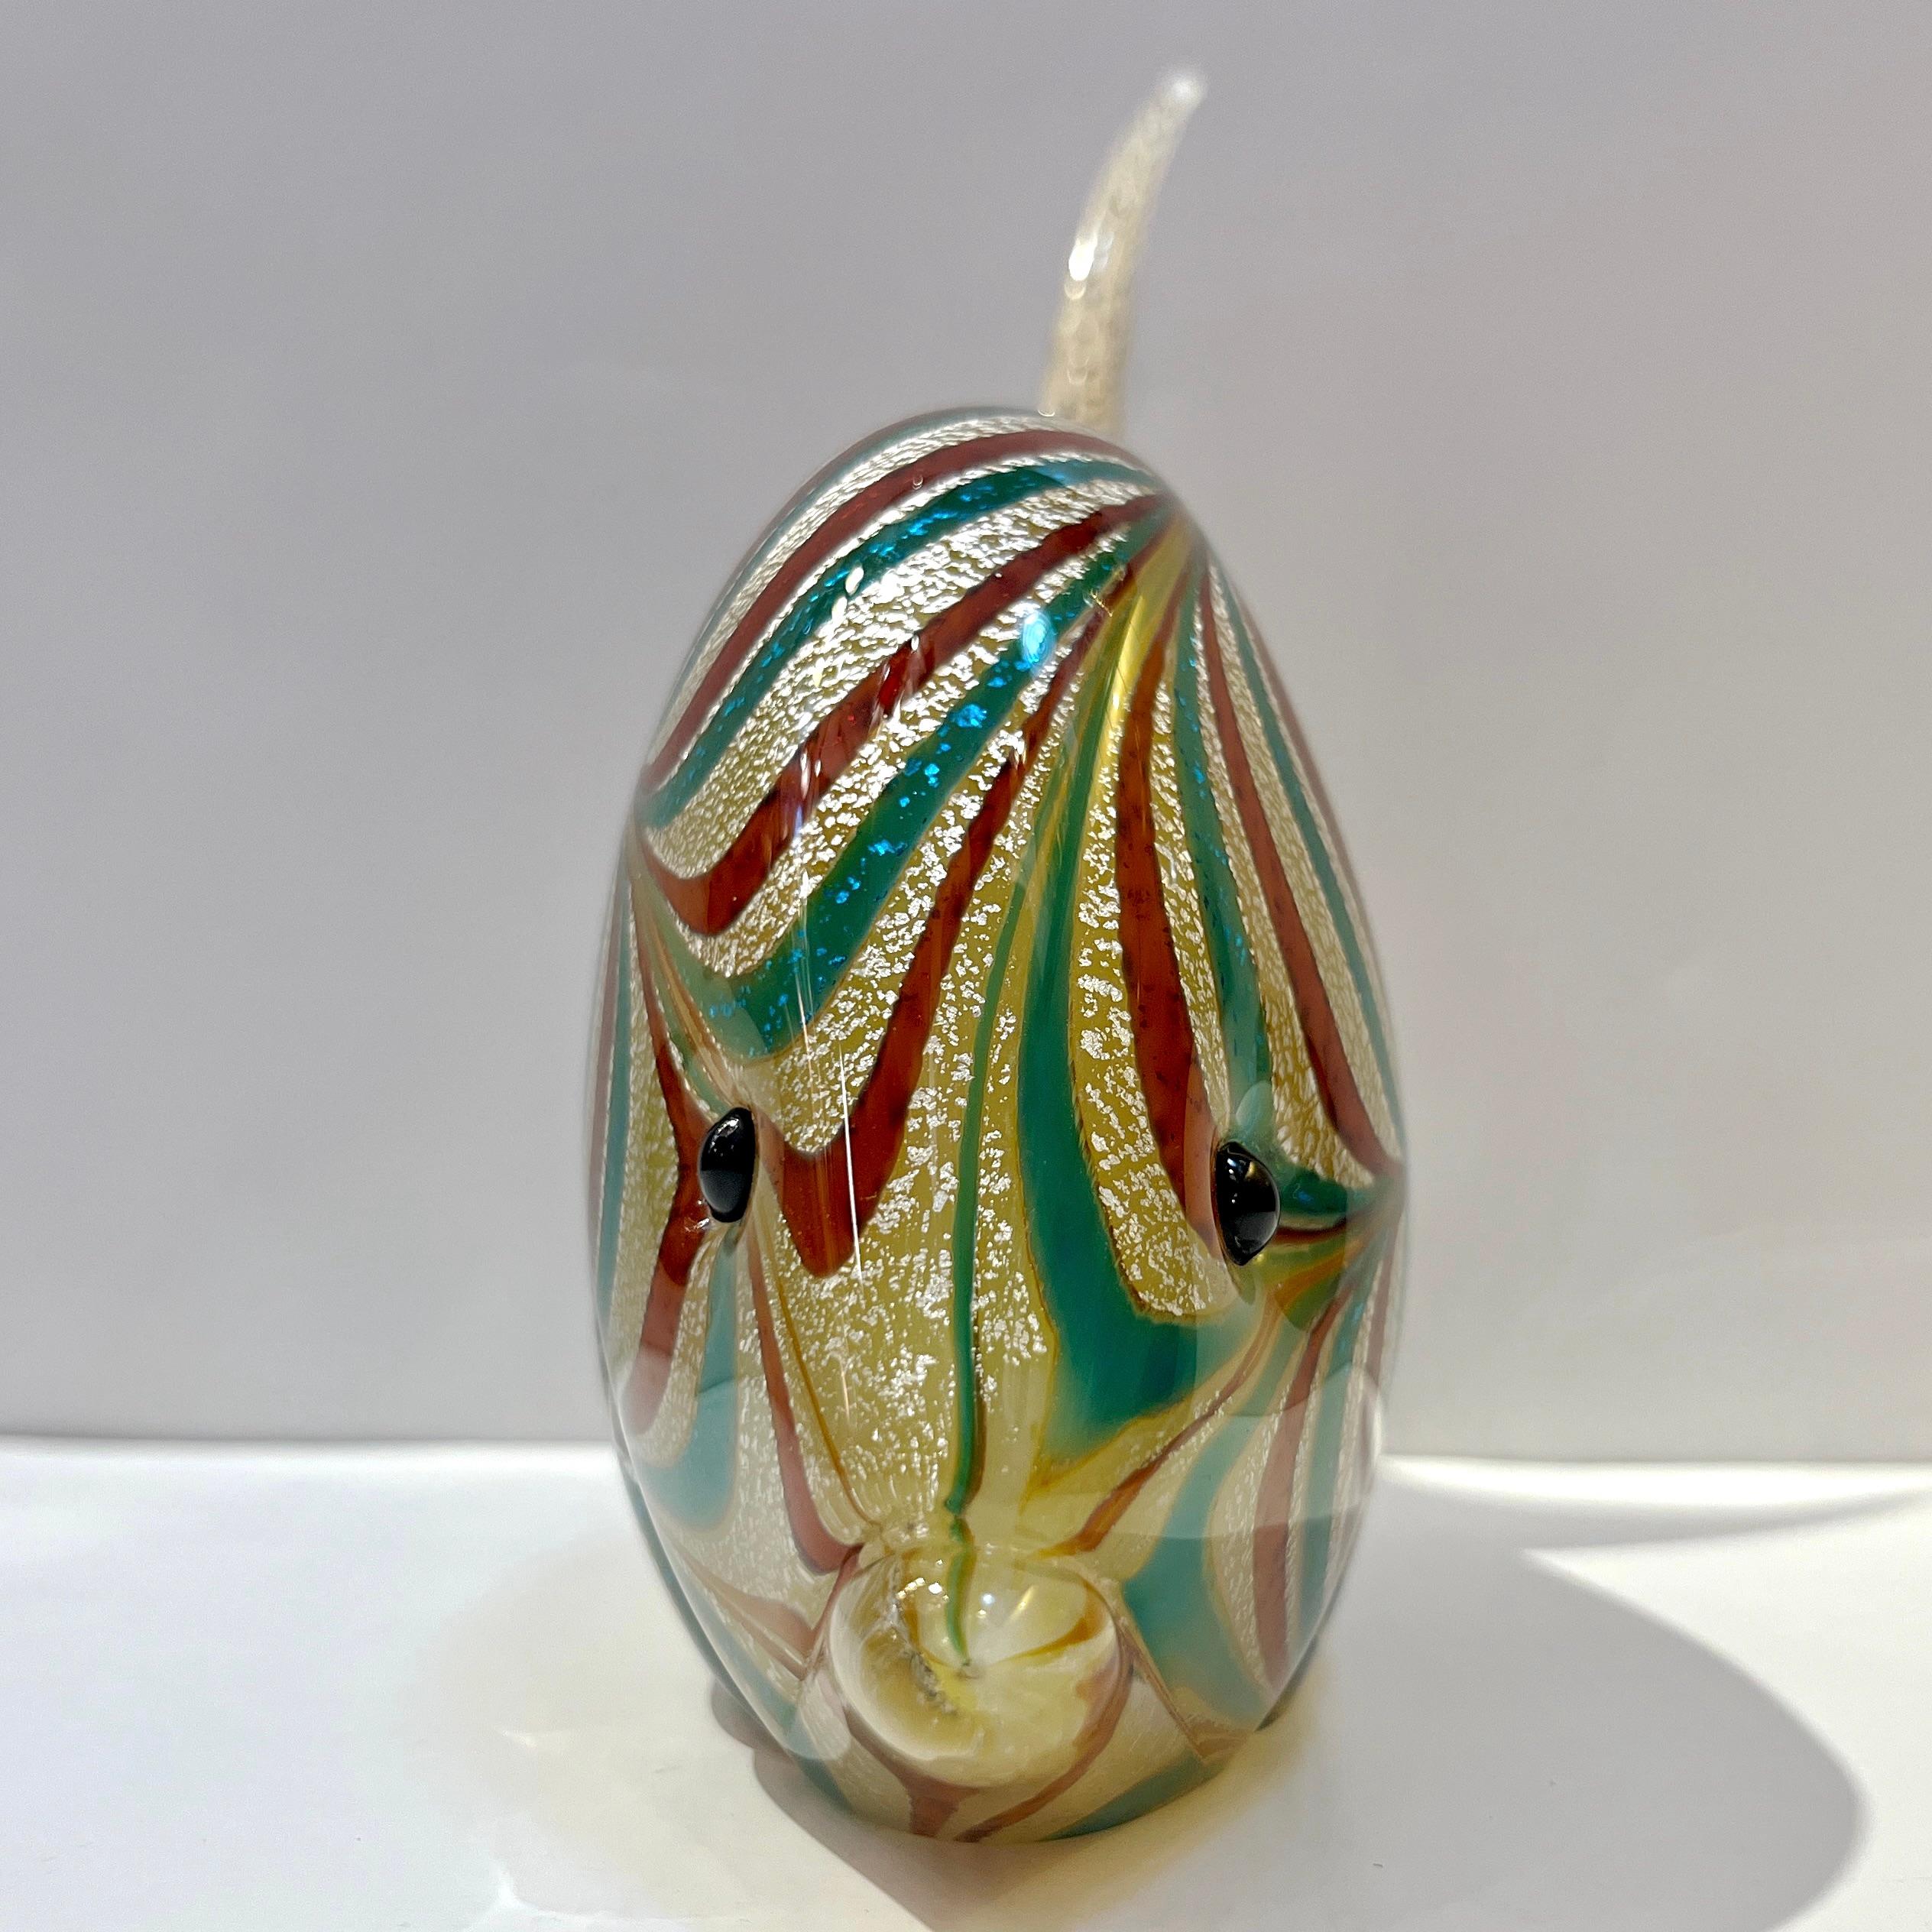 1960s Italian mid-century modern sculptural Murano glass fish of exquisite craftmanship, attributed to Archimede Seguso. It is realized using the Sommerso technique, a crystal clear layer of glass, blown over the amber stone color glass core,